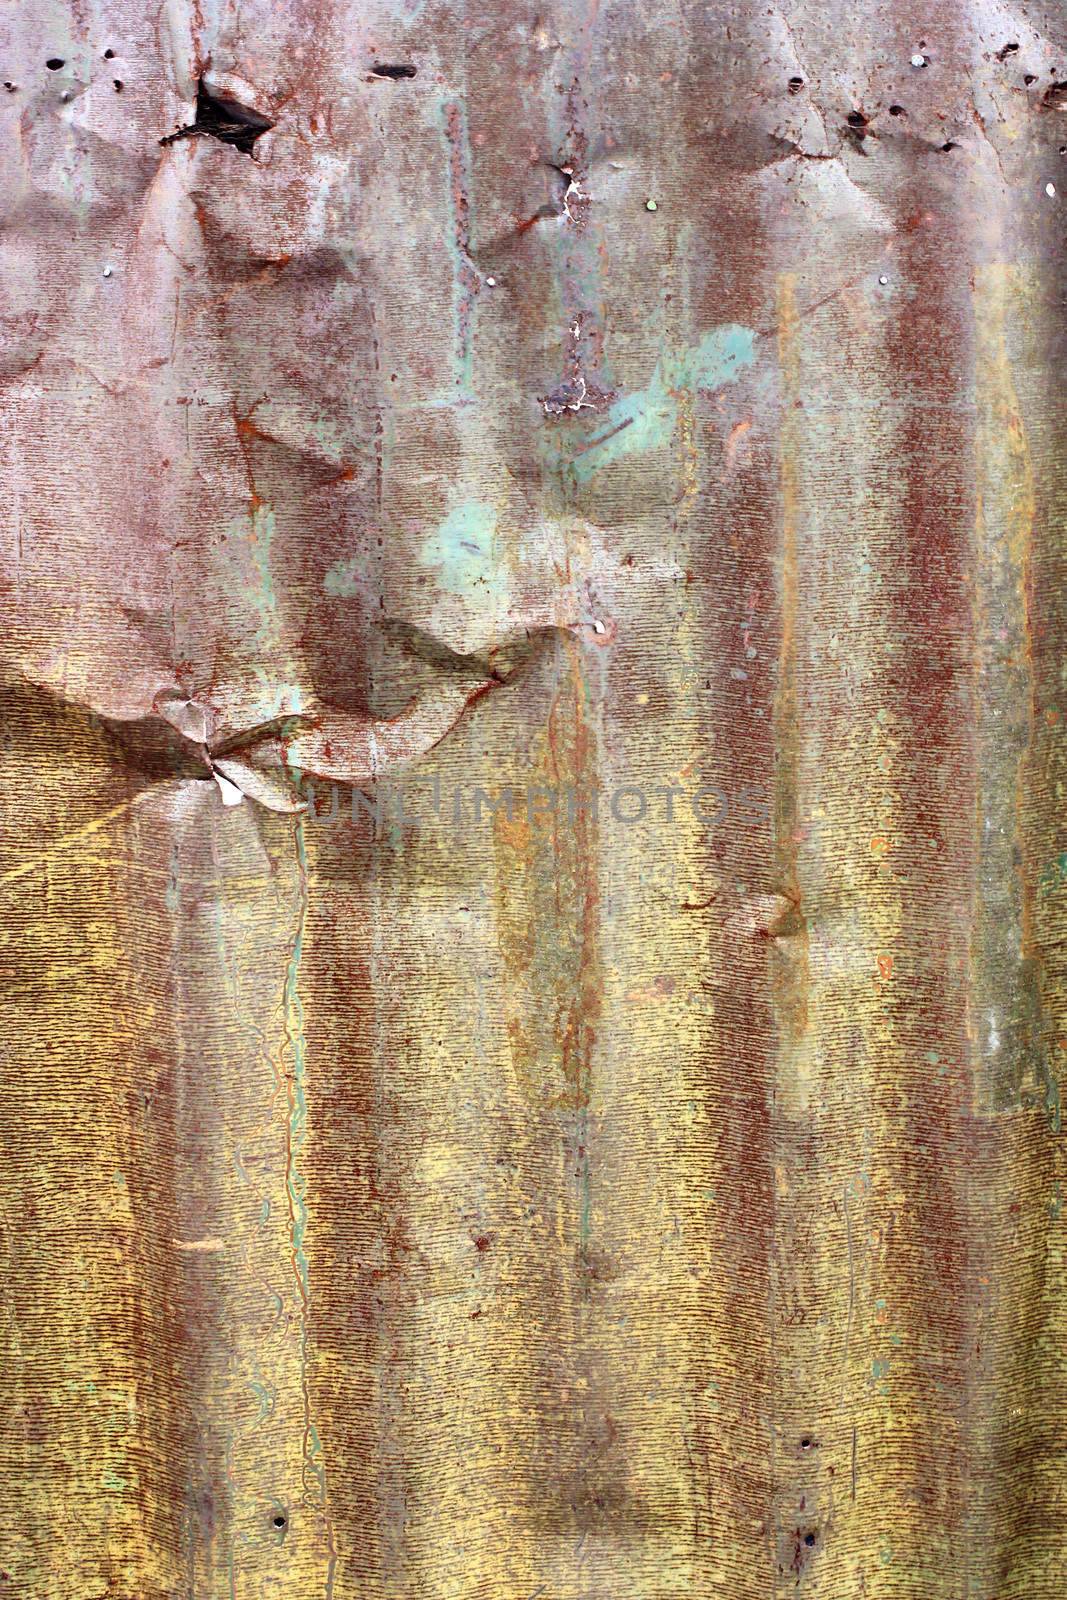 A rusty damaged corrugated iron metal texture by nuchylee